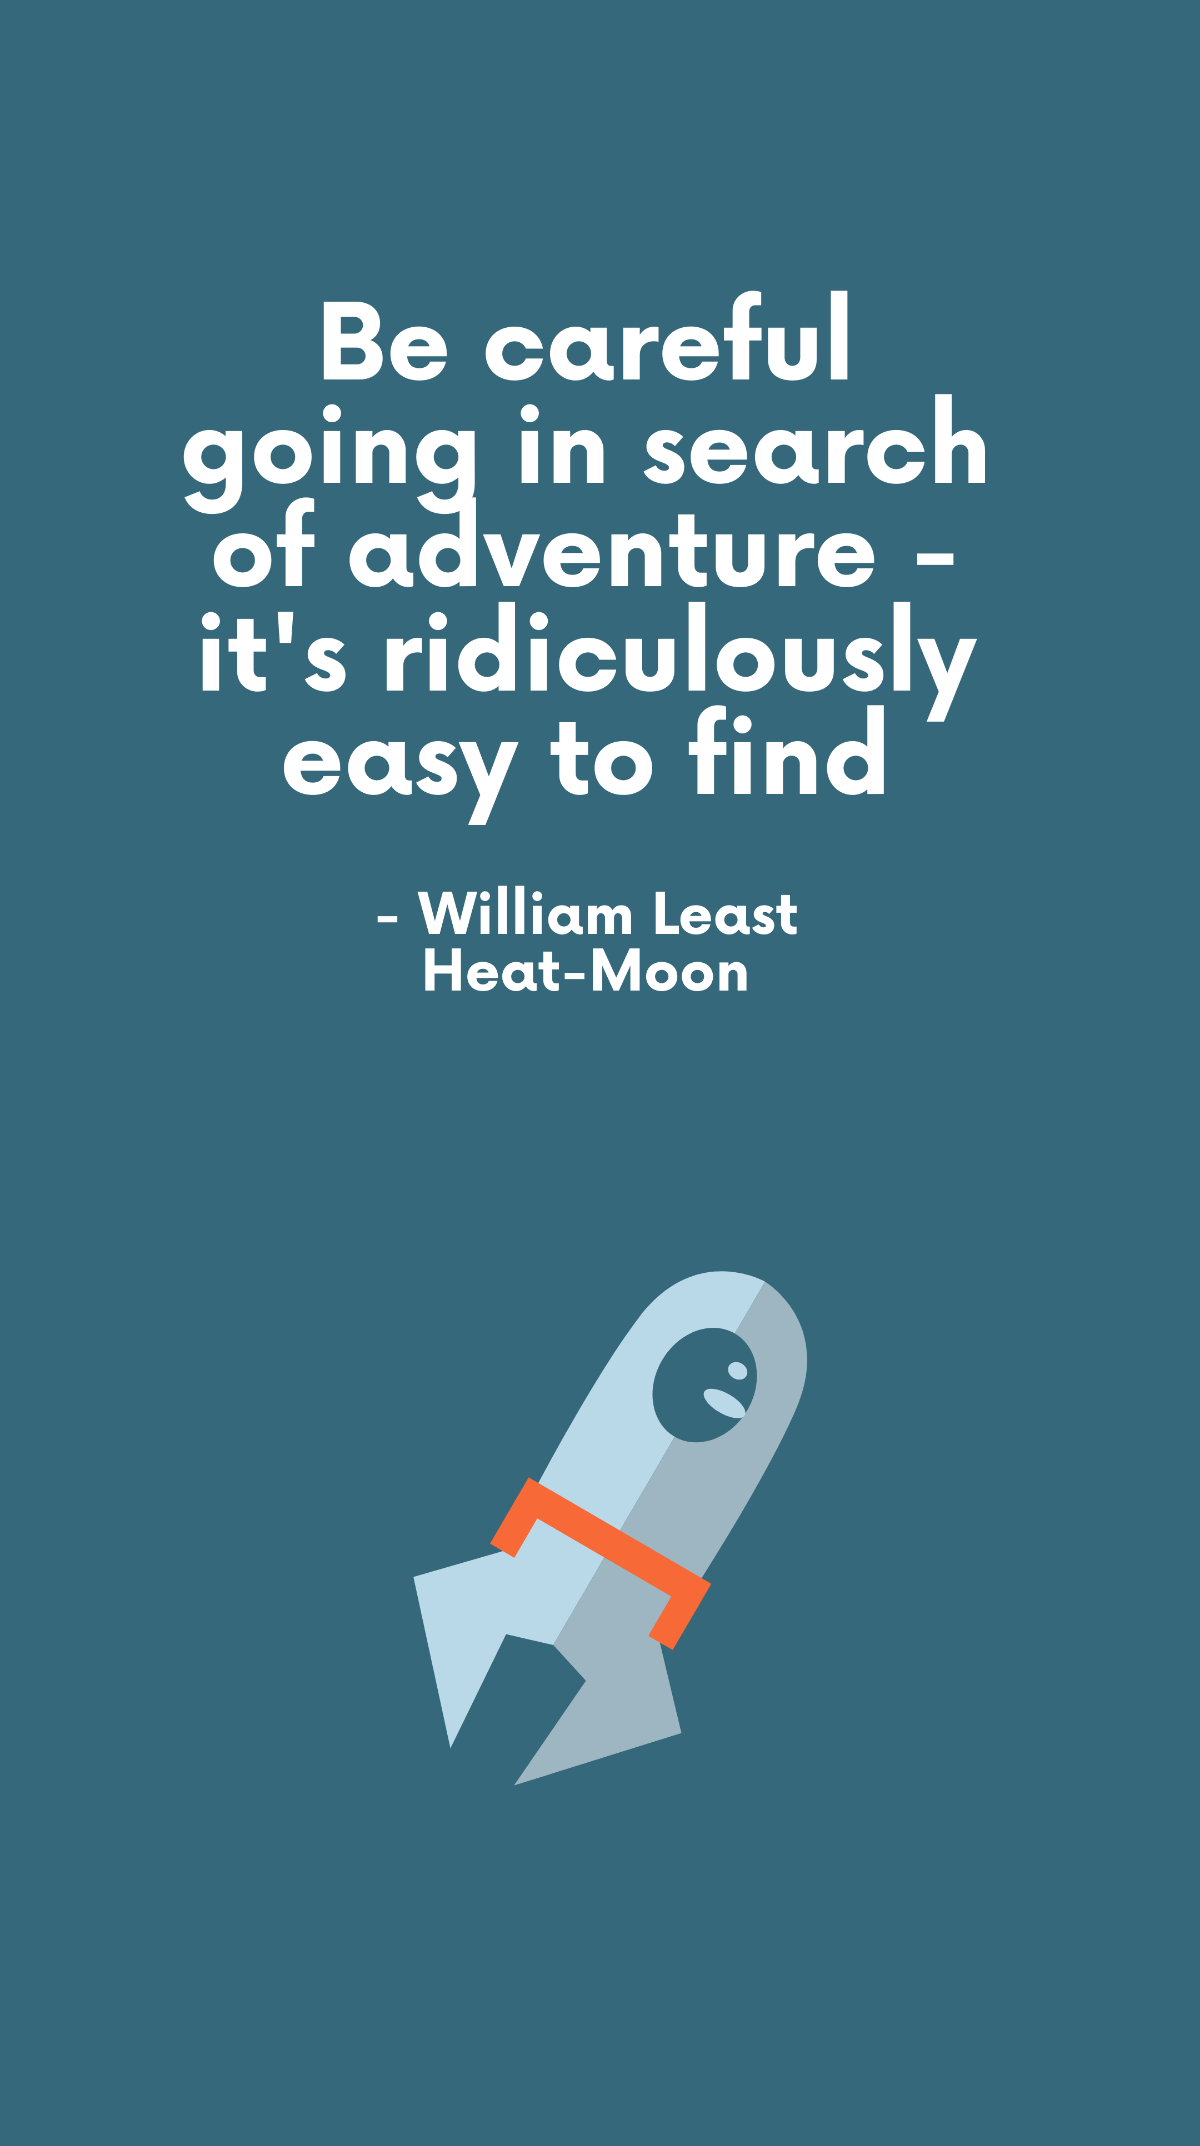 Free William Least Heat-Moon - Be careful going in search of adventure - it's ridiculously easy to find Template